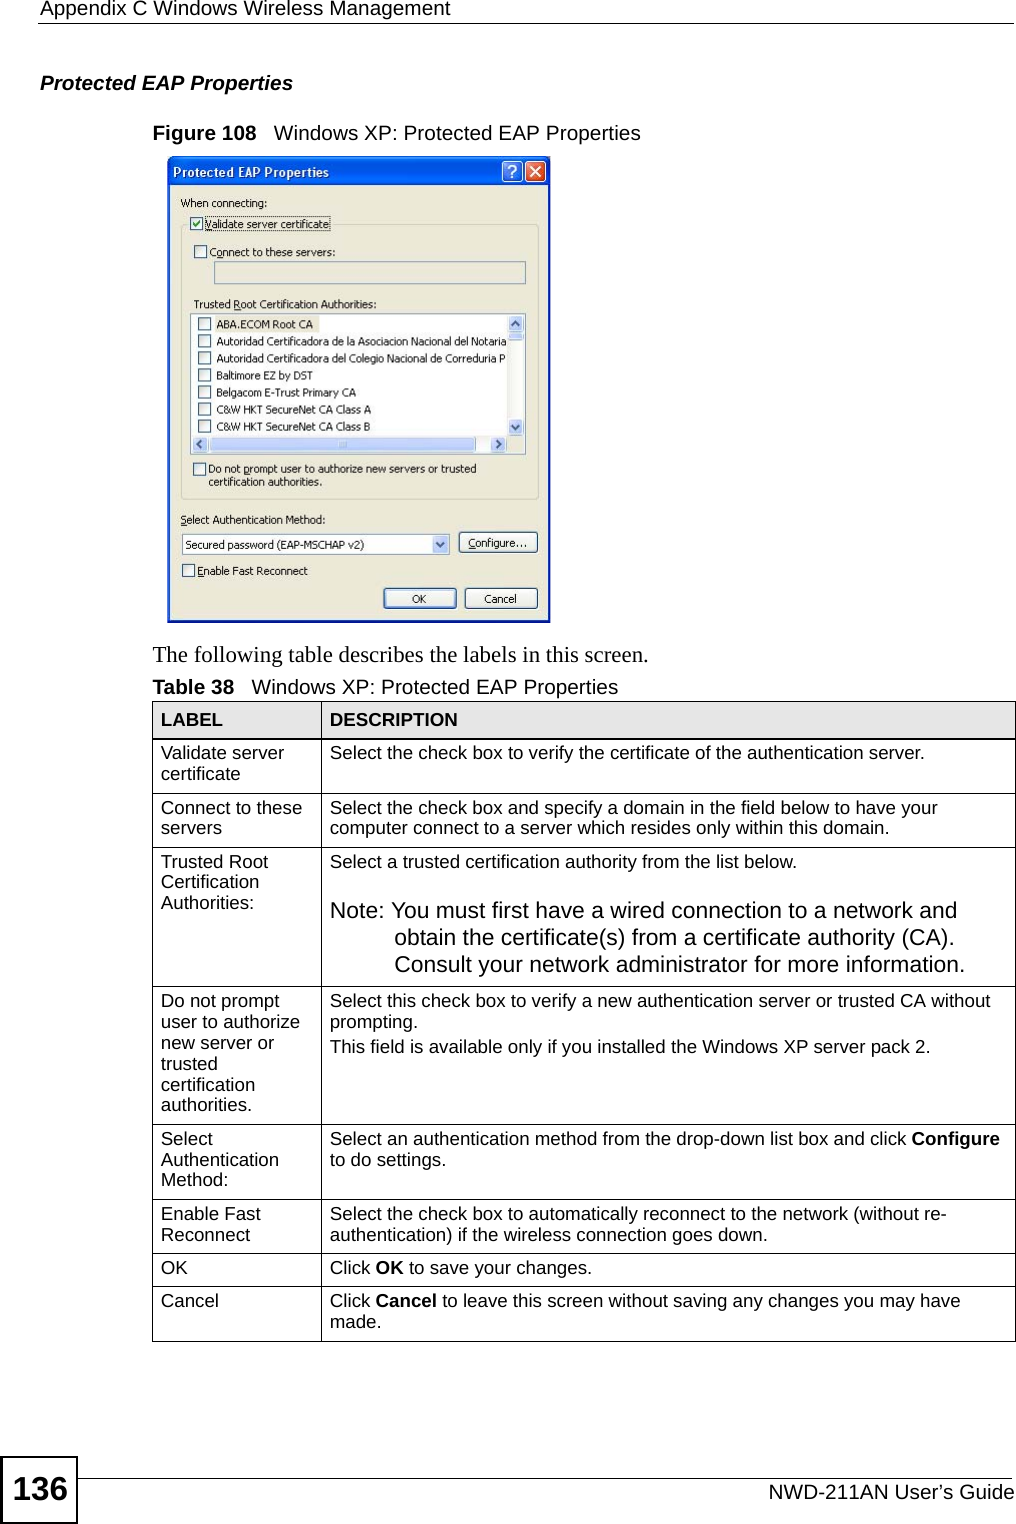 Appendix C Windows Wireless ManagementNWD-211AN User’s Guide136Protected EAP PropertiesFigure 108   Windows XP: Protected EAP PropertiesThe following table describes the labels in this screen.Table 38   Windows XP: Protected EAP PropertiesLABEL DESCRIPTIONValidate server certificate Select the check box to verify the certificate of the authentication server.Connect to these servers Select the check box and specify a domain in the field below to have your computer connect to a server which resides only within this domain.Trusted Root Certification Authorities:Select a trusted certification authority from the list below.Note: You must first have a wired connection to a network and obtain the certificate(s) from a certificate authority (CA). Consult your network administrator for more information.Do not prompt user to authorize new server or trusted certification authorities.Select this check box to verify a new authentication server or trusted CA without prompting.This field is available only if you installed the Windows XP server pack 2.Select Authentication Method: Select an authentication method from the drop-down list box and click Configure to do settings.Enable Fast Reconnect Select the check box to automatically reconnect to the network (without re-authentication) if the wireless connection goes down.OK Click OK to save your changes.Cancel Click Cancel to leave this screen without saving any changes you may have made.